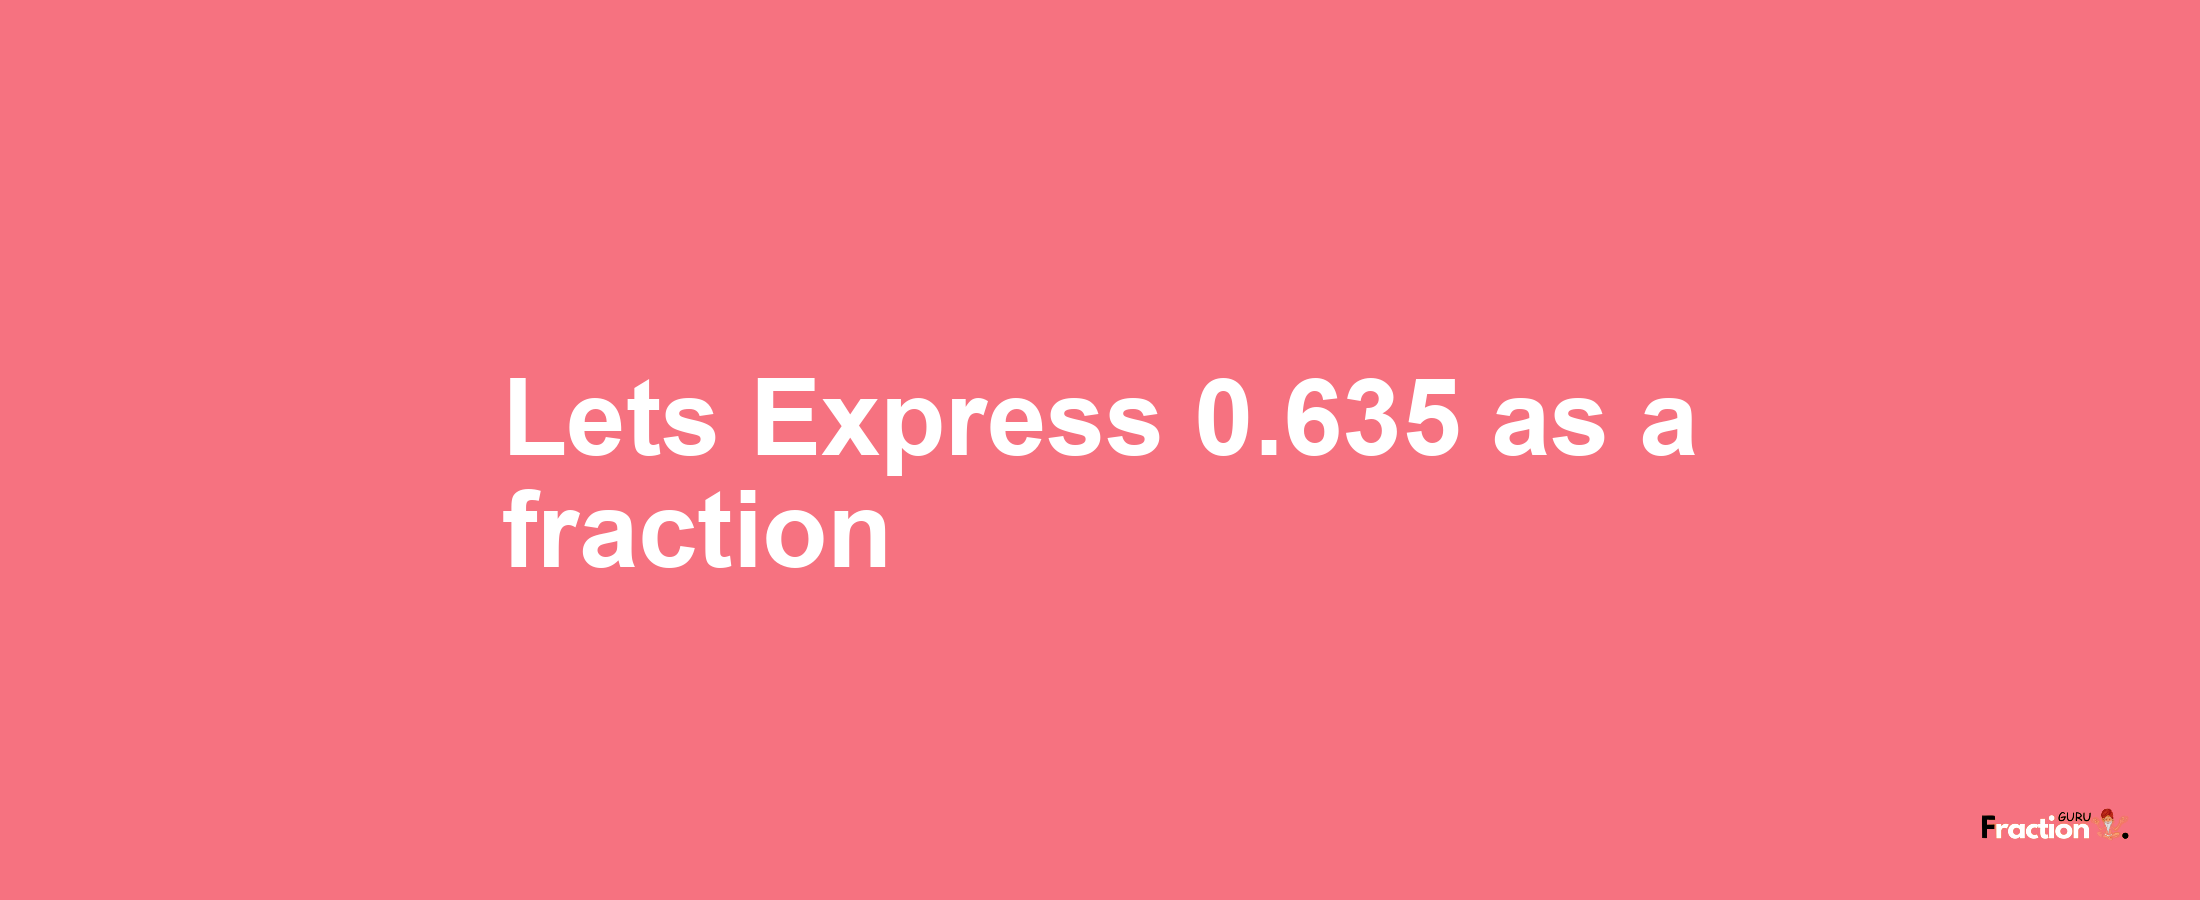 Lets Express 0.635 as afraction